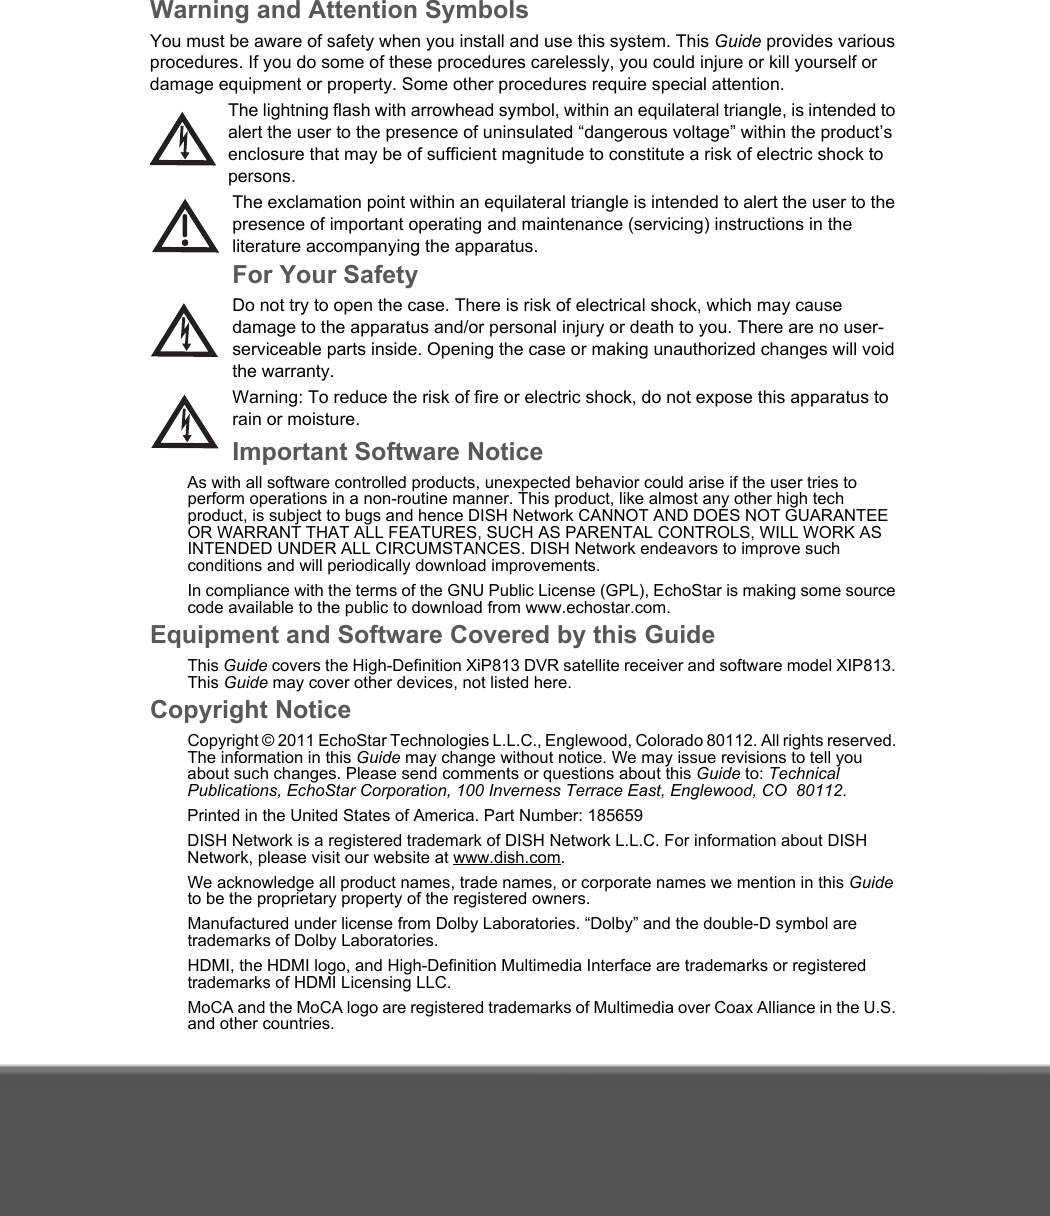 Warning and Attention SymbolsYou must be aware of safety when you install and use this system. This Guide provides various procedures. If you do some of these procedures carelessly, you could injure or kill yourself or damage equipment or property. Some other procedures require special attention.The lightning flash with arrowhead symbol, within an equilateral triangle, is intended to alert the user to the presence of uninsulated “dangerous voltage” within the product’s enclosure that may be of sufficient magnitude to constitute a risk of electric shock to persons.The exclamation point within an equilateral triangle is intended to alert the user to the presence of important operating and maintenance (servicing) instructions in the literature accompanying the apparatus.For Your SafetyDo not try to open the case. There is risk of electrical shock, which may cause damage to the apparatus and/or personal injury or death to you. There are no user-serviceable parts inside. Opening the case or making unauthorized changes will void the warranty.Warning: To reduce the risk of fire or electric shock, do not expose this apparatus to rain or moisture. Important Software NoticeAs with all software controlled products, unexpected behavior could arise if the user tries to perform operations in a non-routine manner. This product, like almost any other high tech product, is subject to bugs and hence DISH Network CANNOT AND DOES NOT GUARANTEE OR WARRANT THAT ALL FEATURES, SUCH AS PARENTAL CONTROLS, WILL WORK AS INTENDED UNDER ALL CIRCUMSTANCES. DISH Network endeavors to improve such conditions and will periodically download improvements. In compliance with the terms of the GNU Public License (GPL), EchoStar is making some source code available to the public to download from www.echostar.com.Equipment and Software Covered by this GuideThis Guide covers the High-Definition XiP813 DVR satellite receiver and software model XIP813. This Guide may cover other devices, not listed here. Copyright NoticeCopyright © 2011 EchoStar Technologies L.L.C., Englewood, Colorado 80112. All rights reserved. The information in this Guide may change without notice. We may issue revisions to tell you about such changes. Please send comments or questions about this Guide to: Technical Publications, EchoStar Corporation, 100 Inverness Terrace East, Englewood, CO  80112. Printed in the United States of America. Part Number: 185659DISH Network is a registered trademark of DISH Network L.L.C. For information about DISH Network, please visit our website at www.dish.com. We acknowledge all product names, trade names, or corporate names we mention in this Guide to be the proprietary property of the registered owners.Manufactured under license from Dolby Laboratories. “Dolby” and the double-D symbol are trademarks of Dolby Laboratories.HDMI, the HDMI logo, and High-Definition Multimedia Interface are trademarks or registered trademarks of HDMI Licensing LLC.MoCA and the MoCA logo are registered trademarks of Multimedia over Coax Alliance in the U.S. and other countries. 